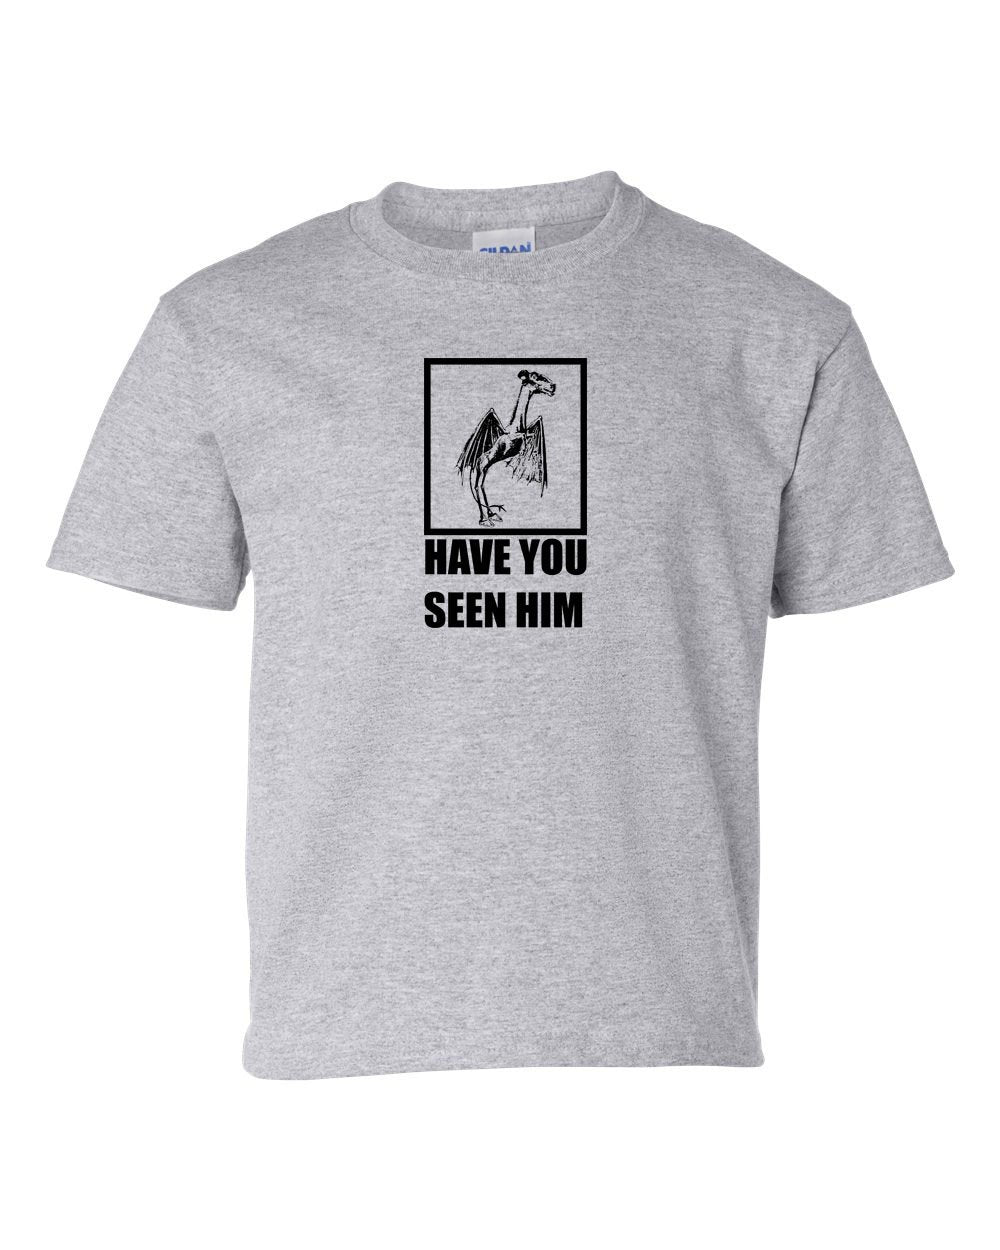 Have You Seen Him? KIDS T-Shirt